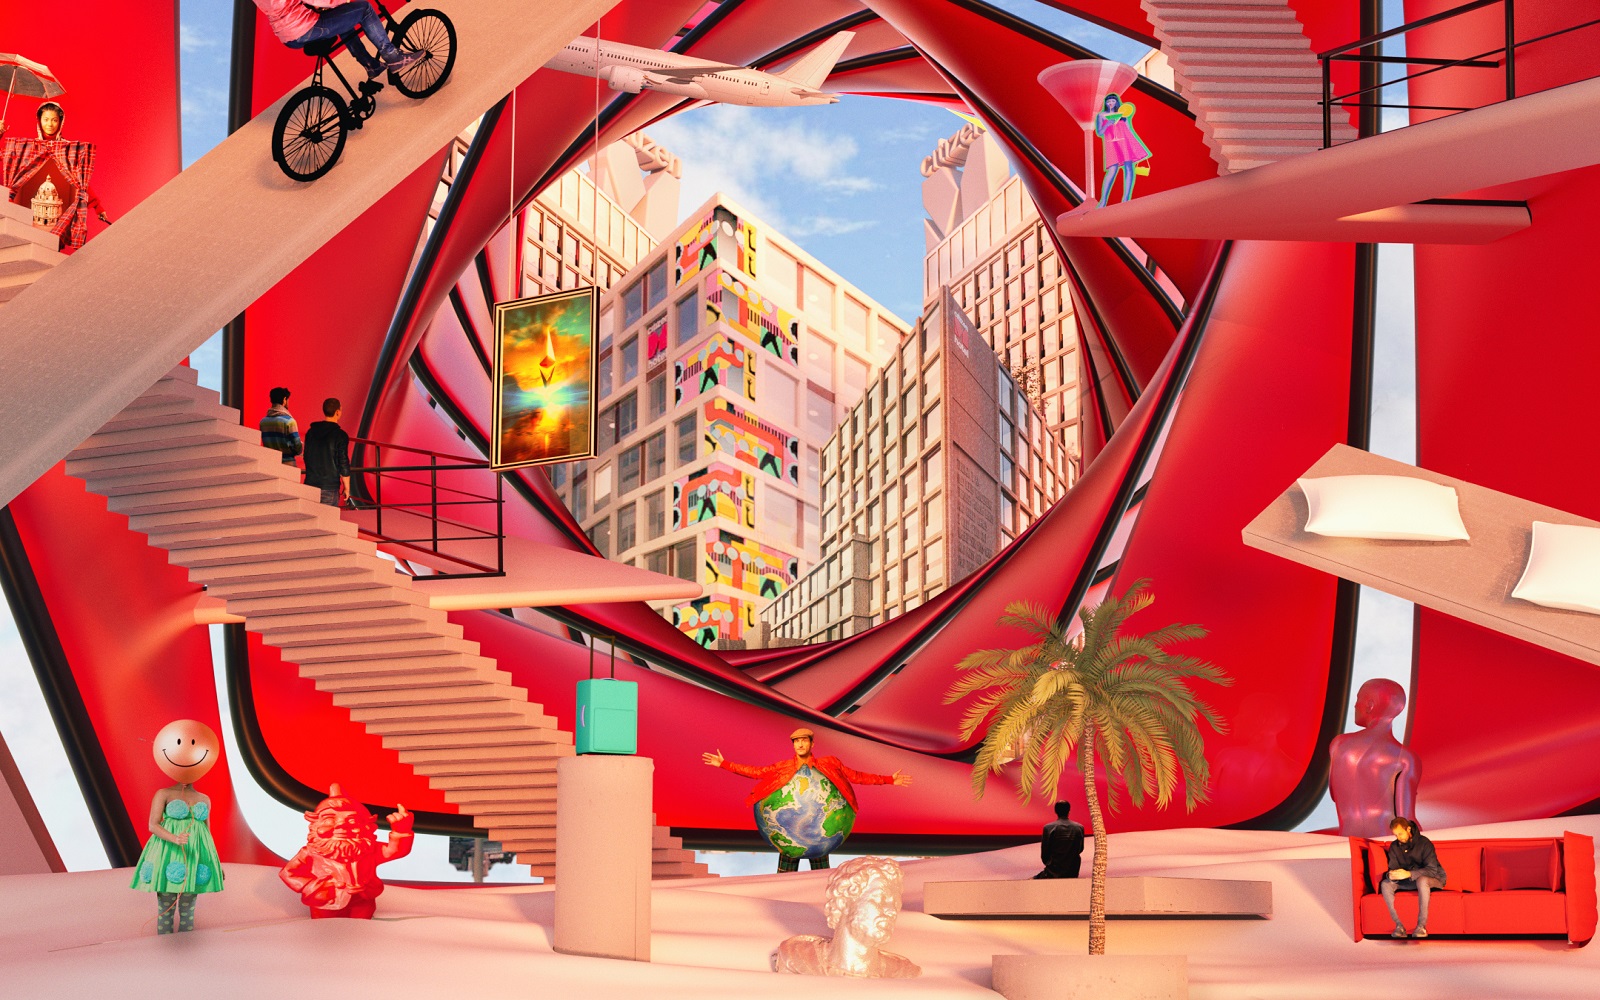 Image caption: citizenM was one of the first hotel brands to buy property in the metaverse. | Image credit: citizenM